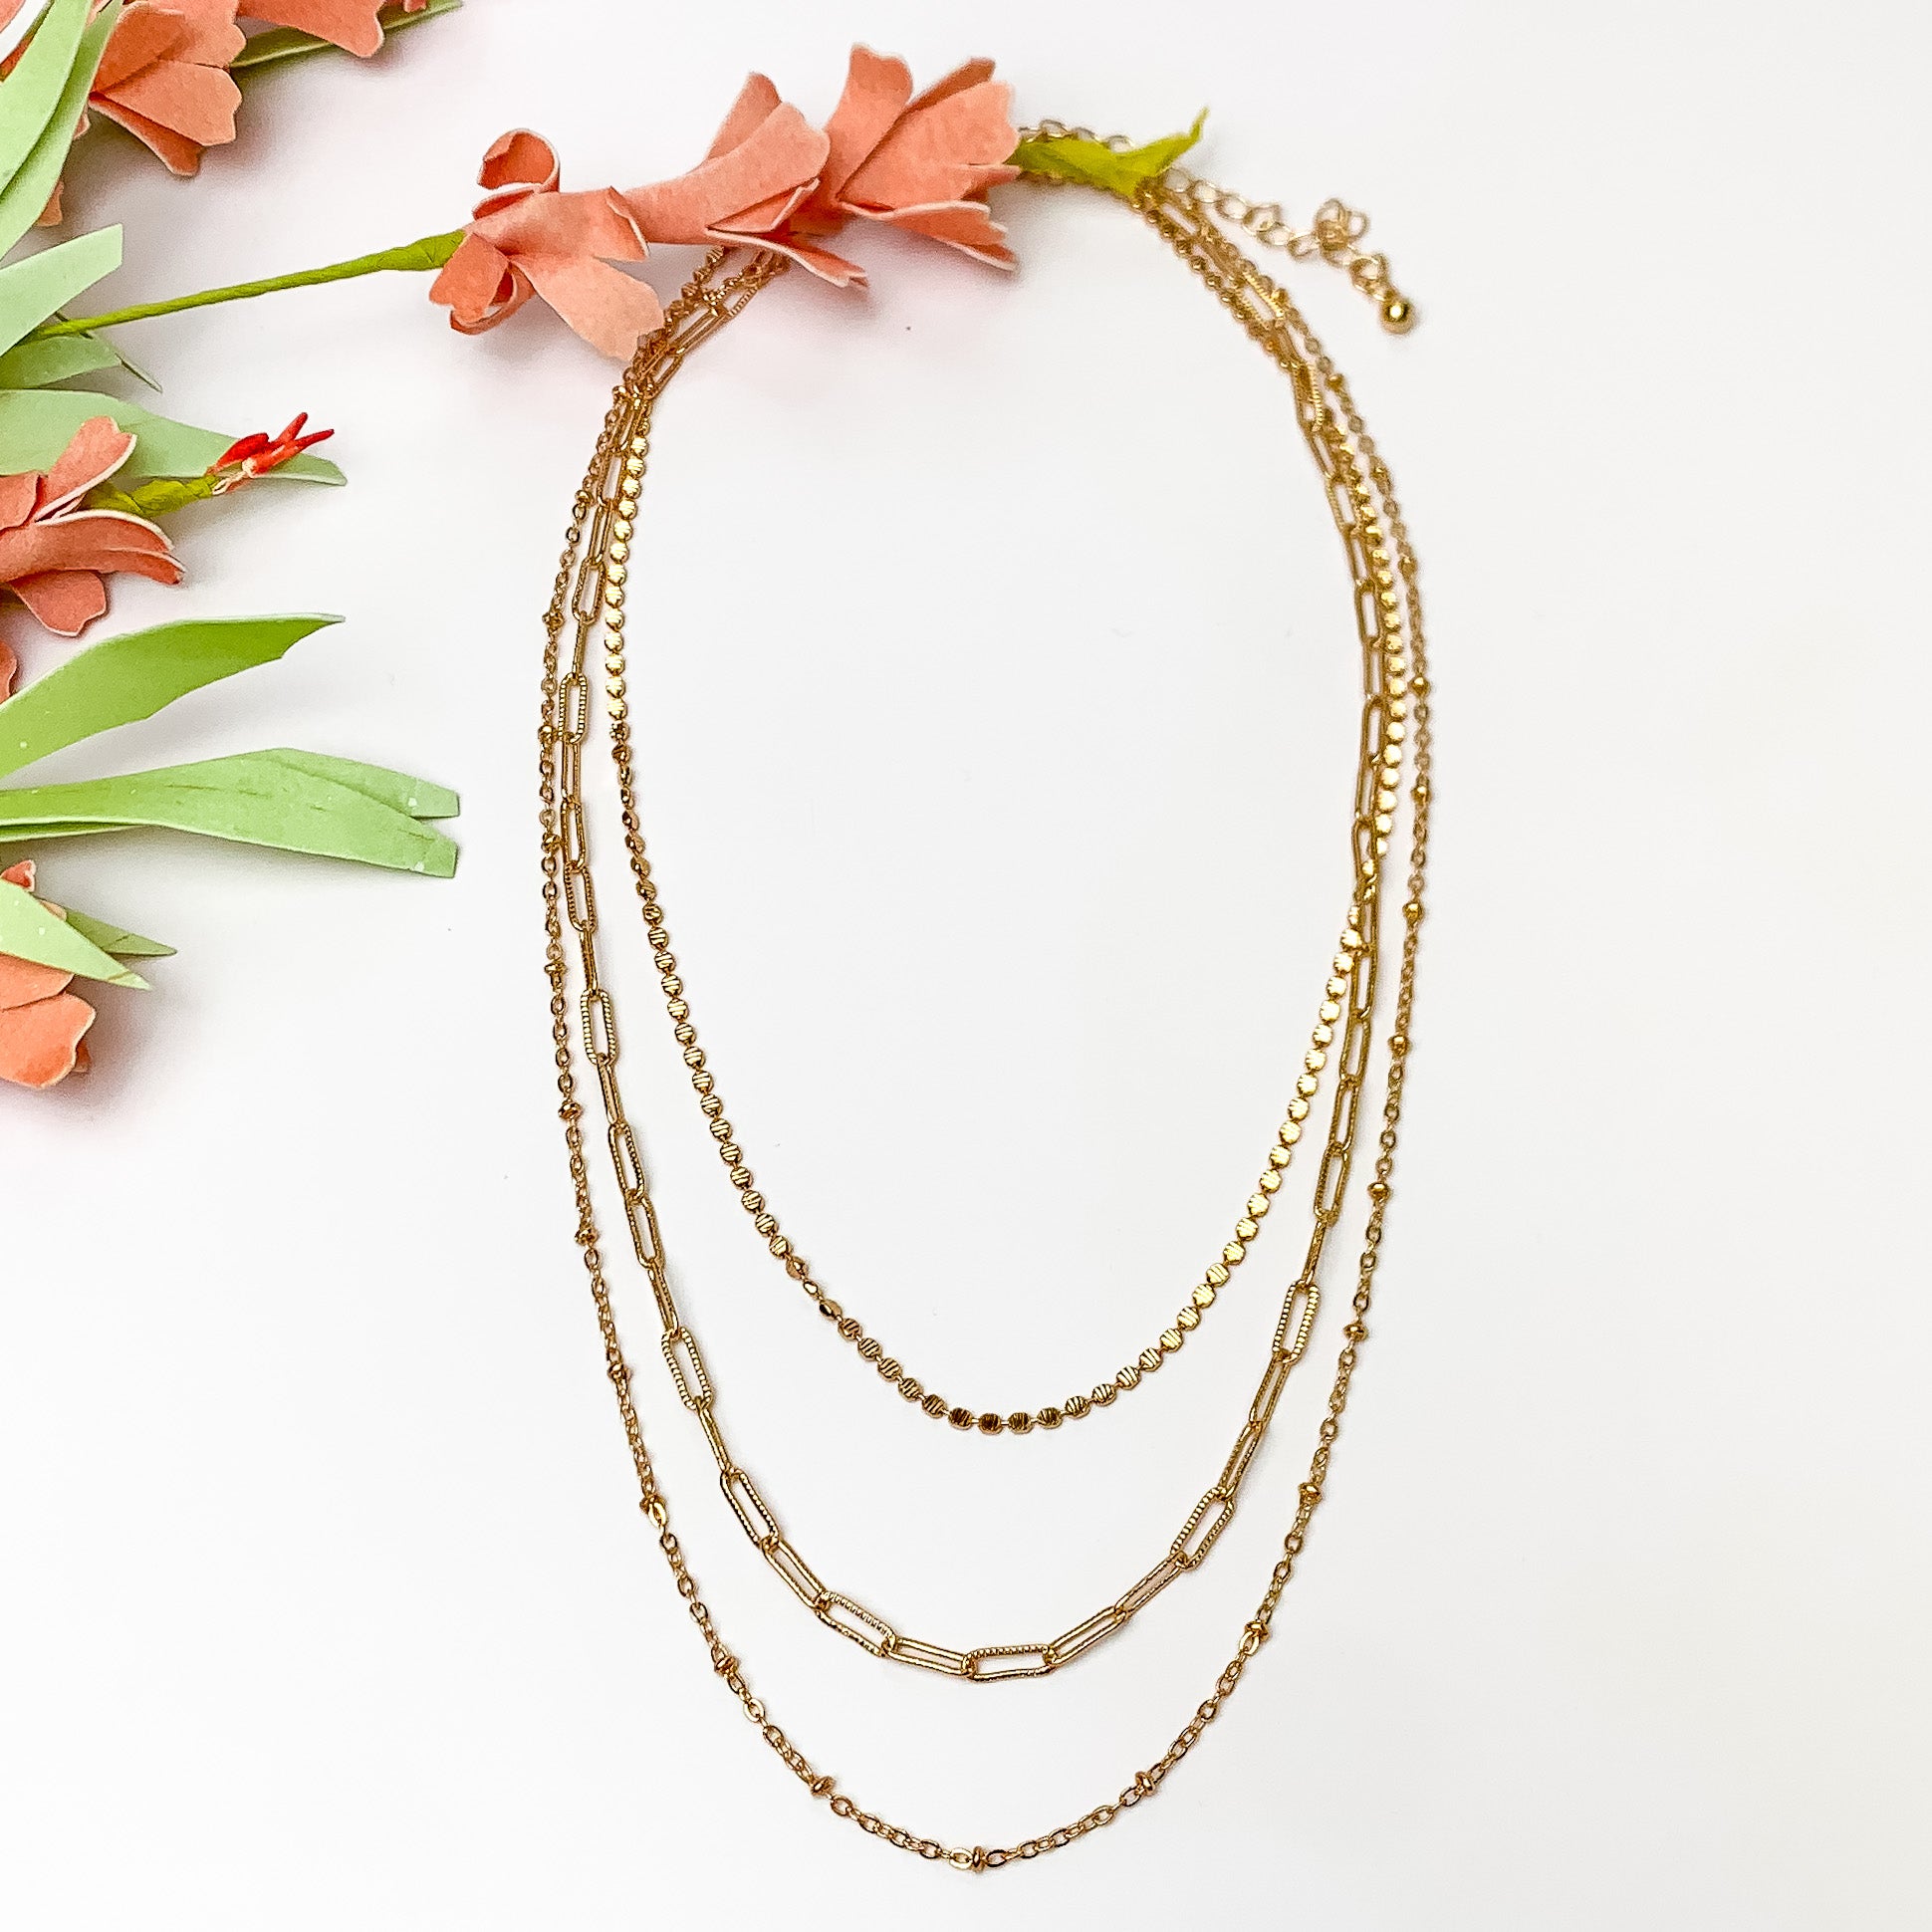 Gold tone three layered chain necklace. Pictured on a white background with flowers to the left.